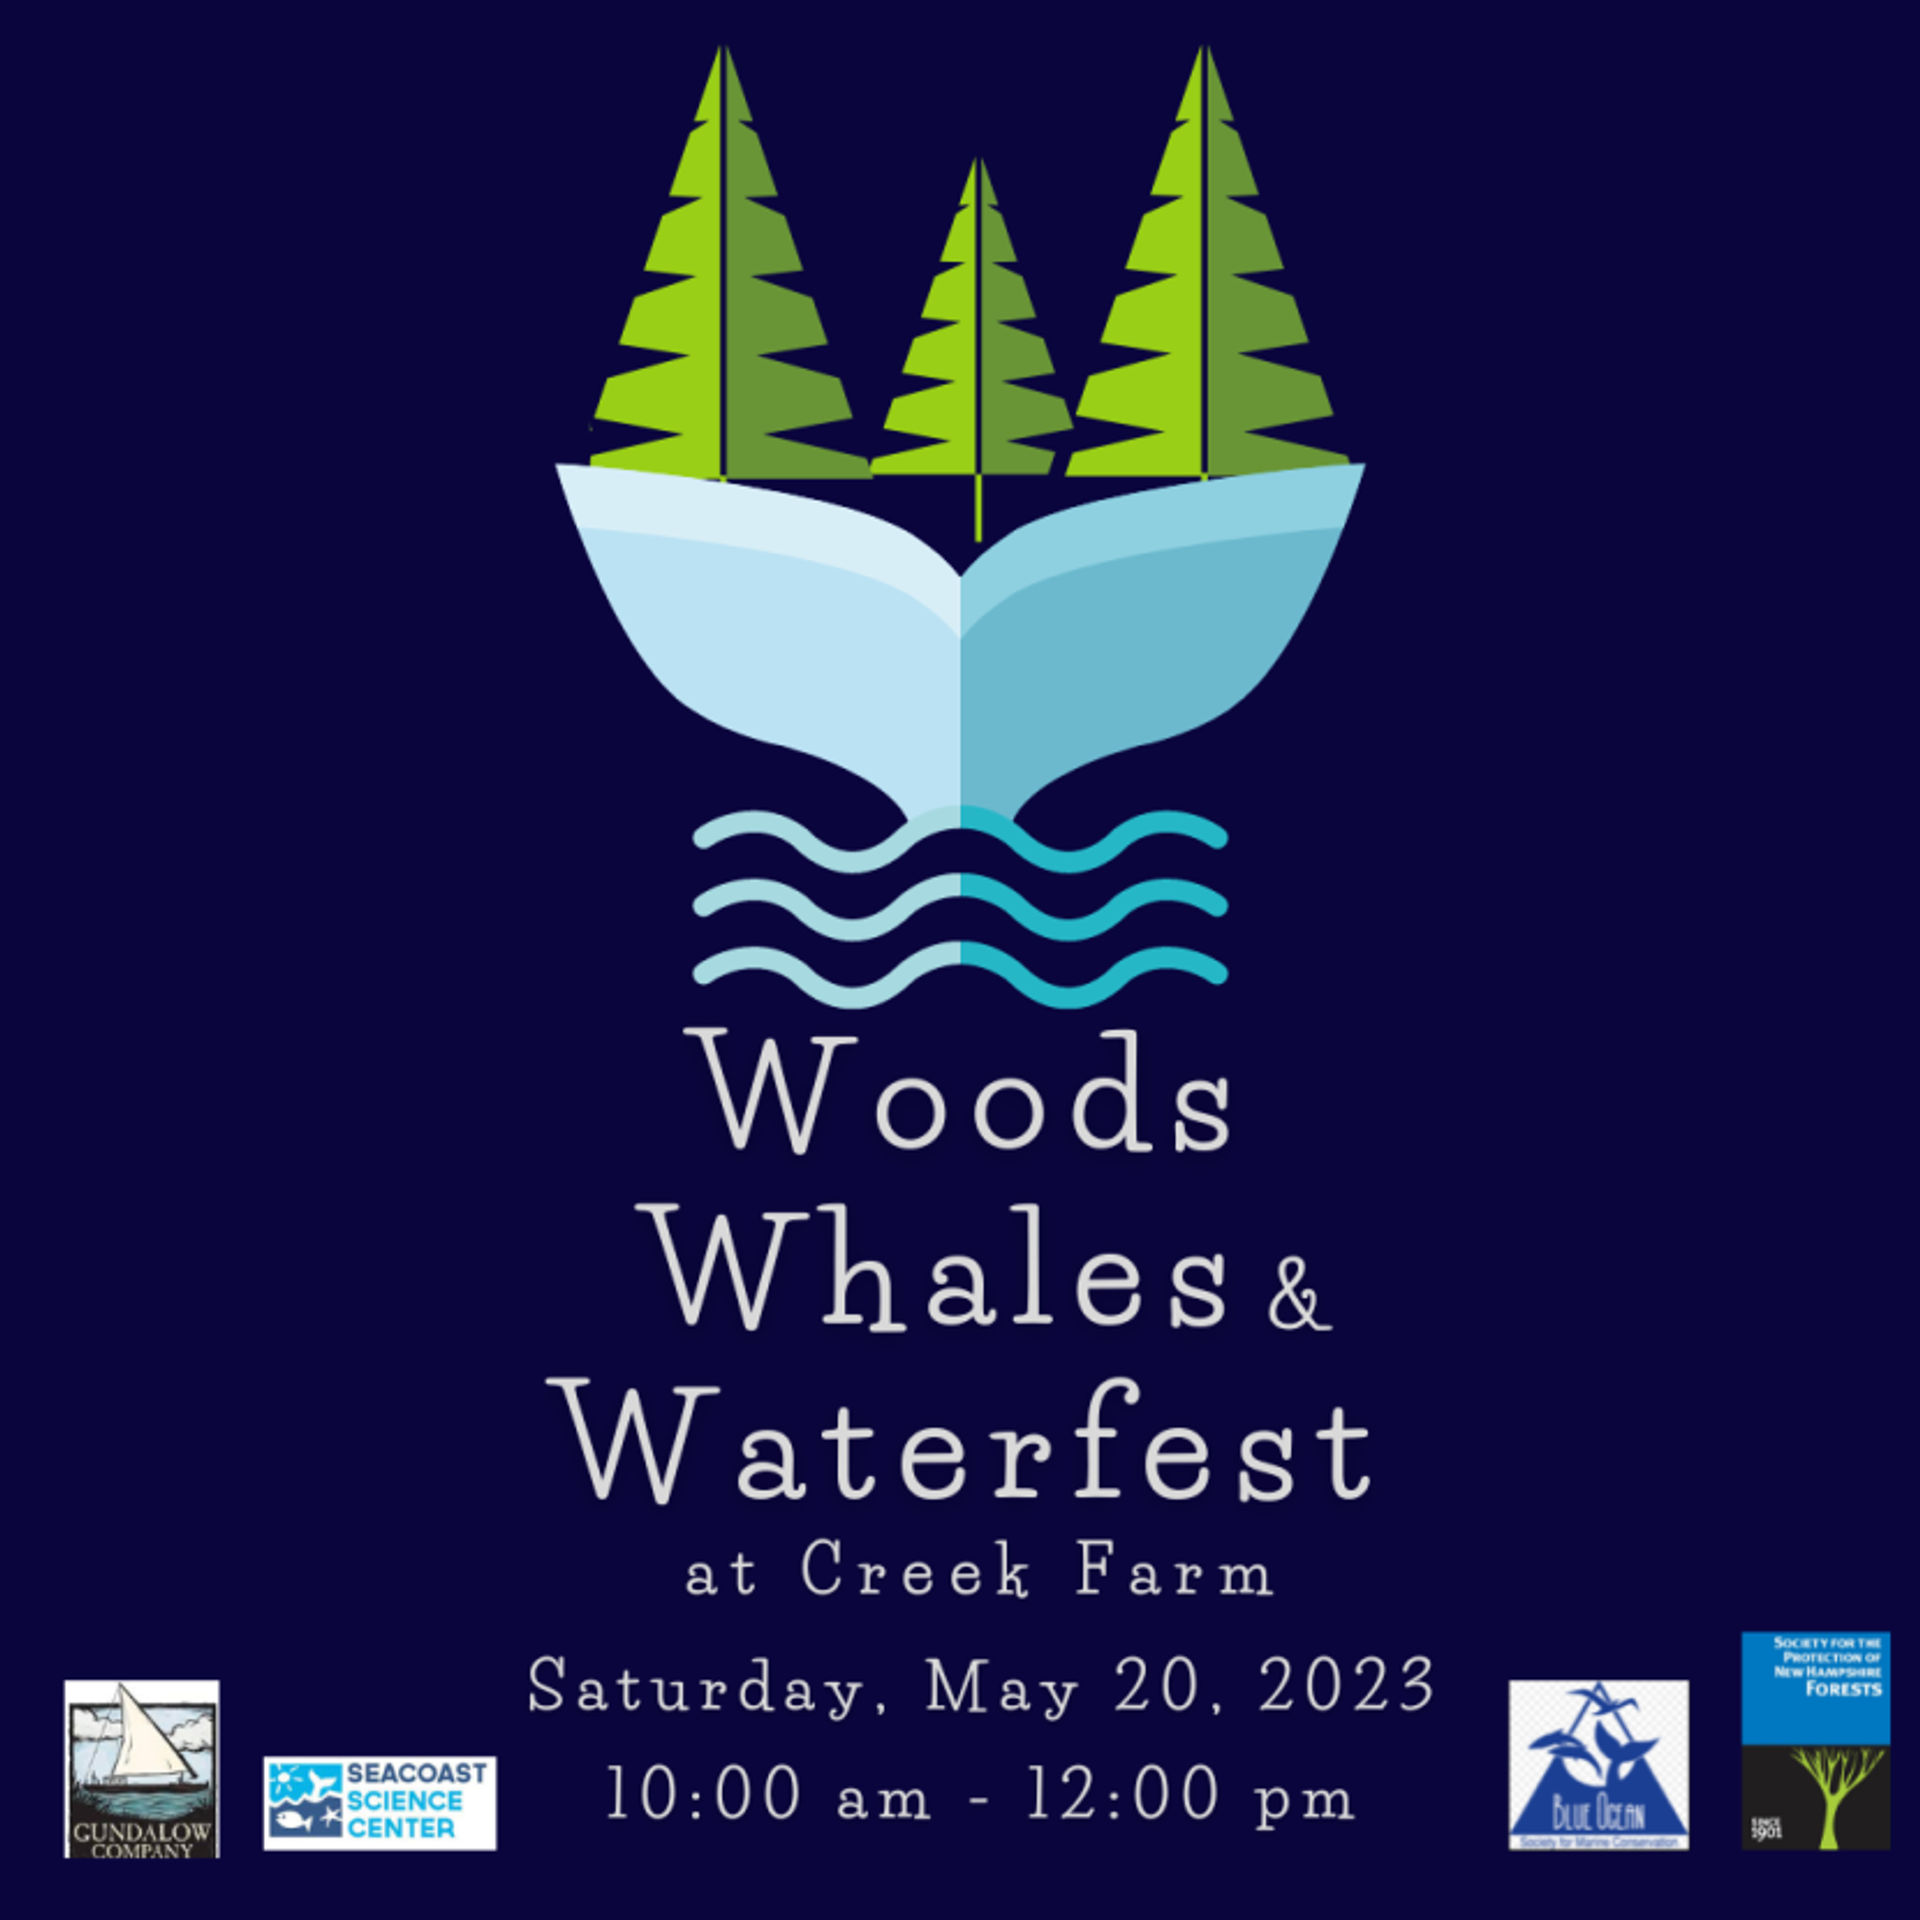 An illustration of a whale's tail with water underneath and trees on top with the sponsors' logos.